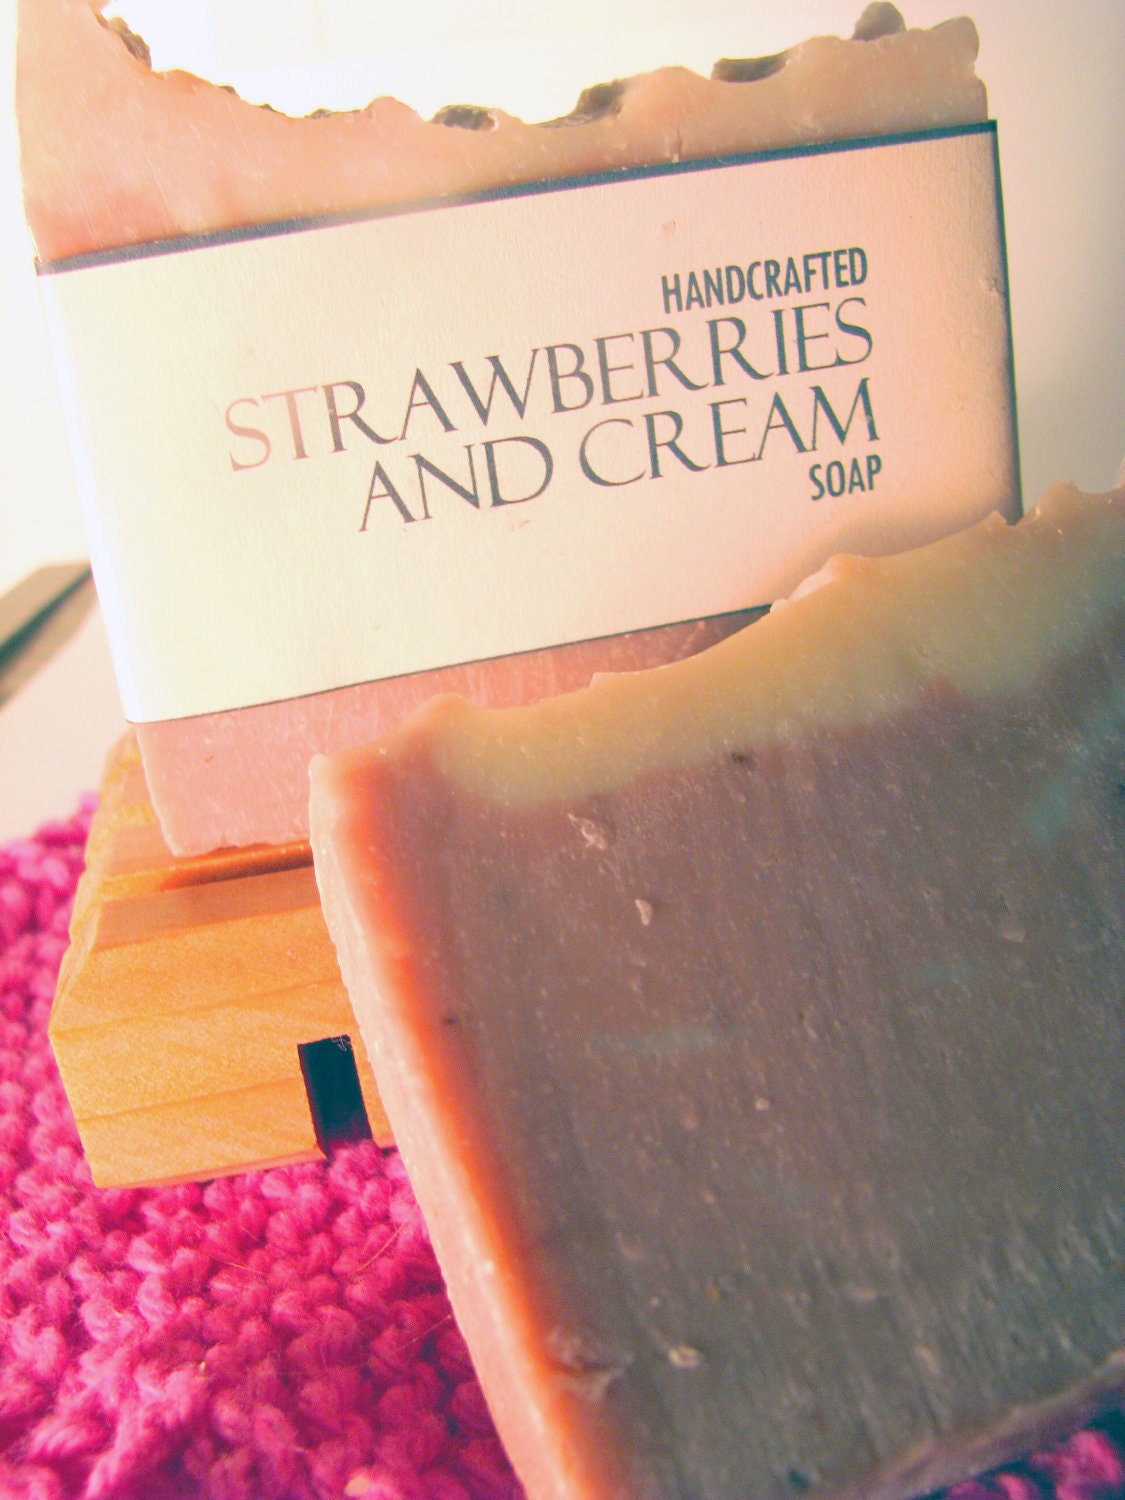 Strawberries and Cream Soap Handcrafted Cold Process Vegan Friendly